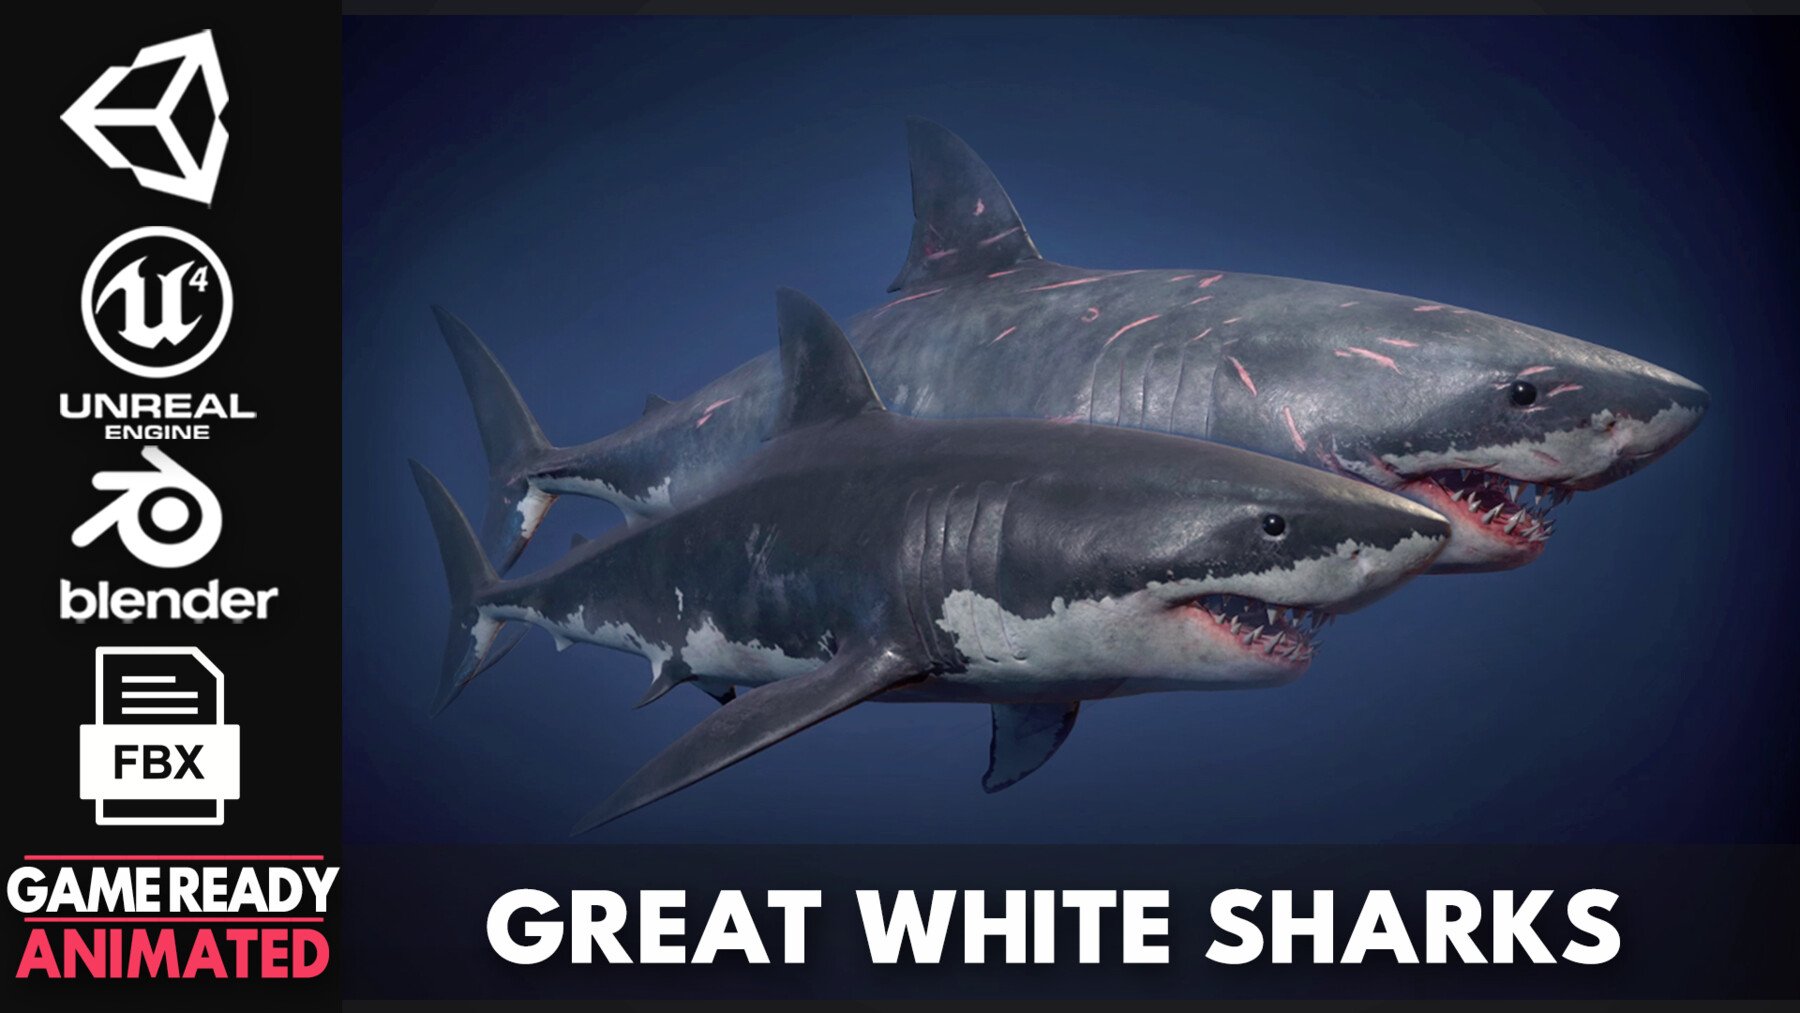 ArtStation - Great White Sharks - Game Ready | Game Assets